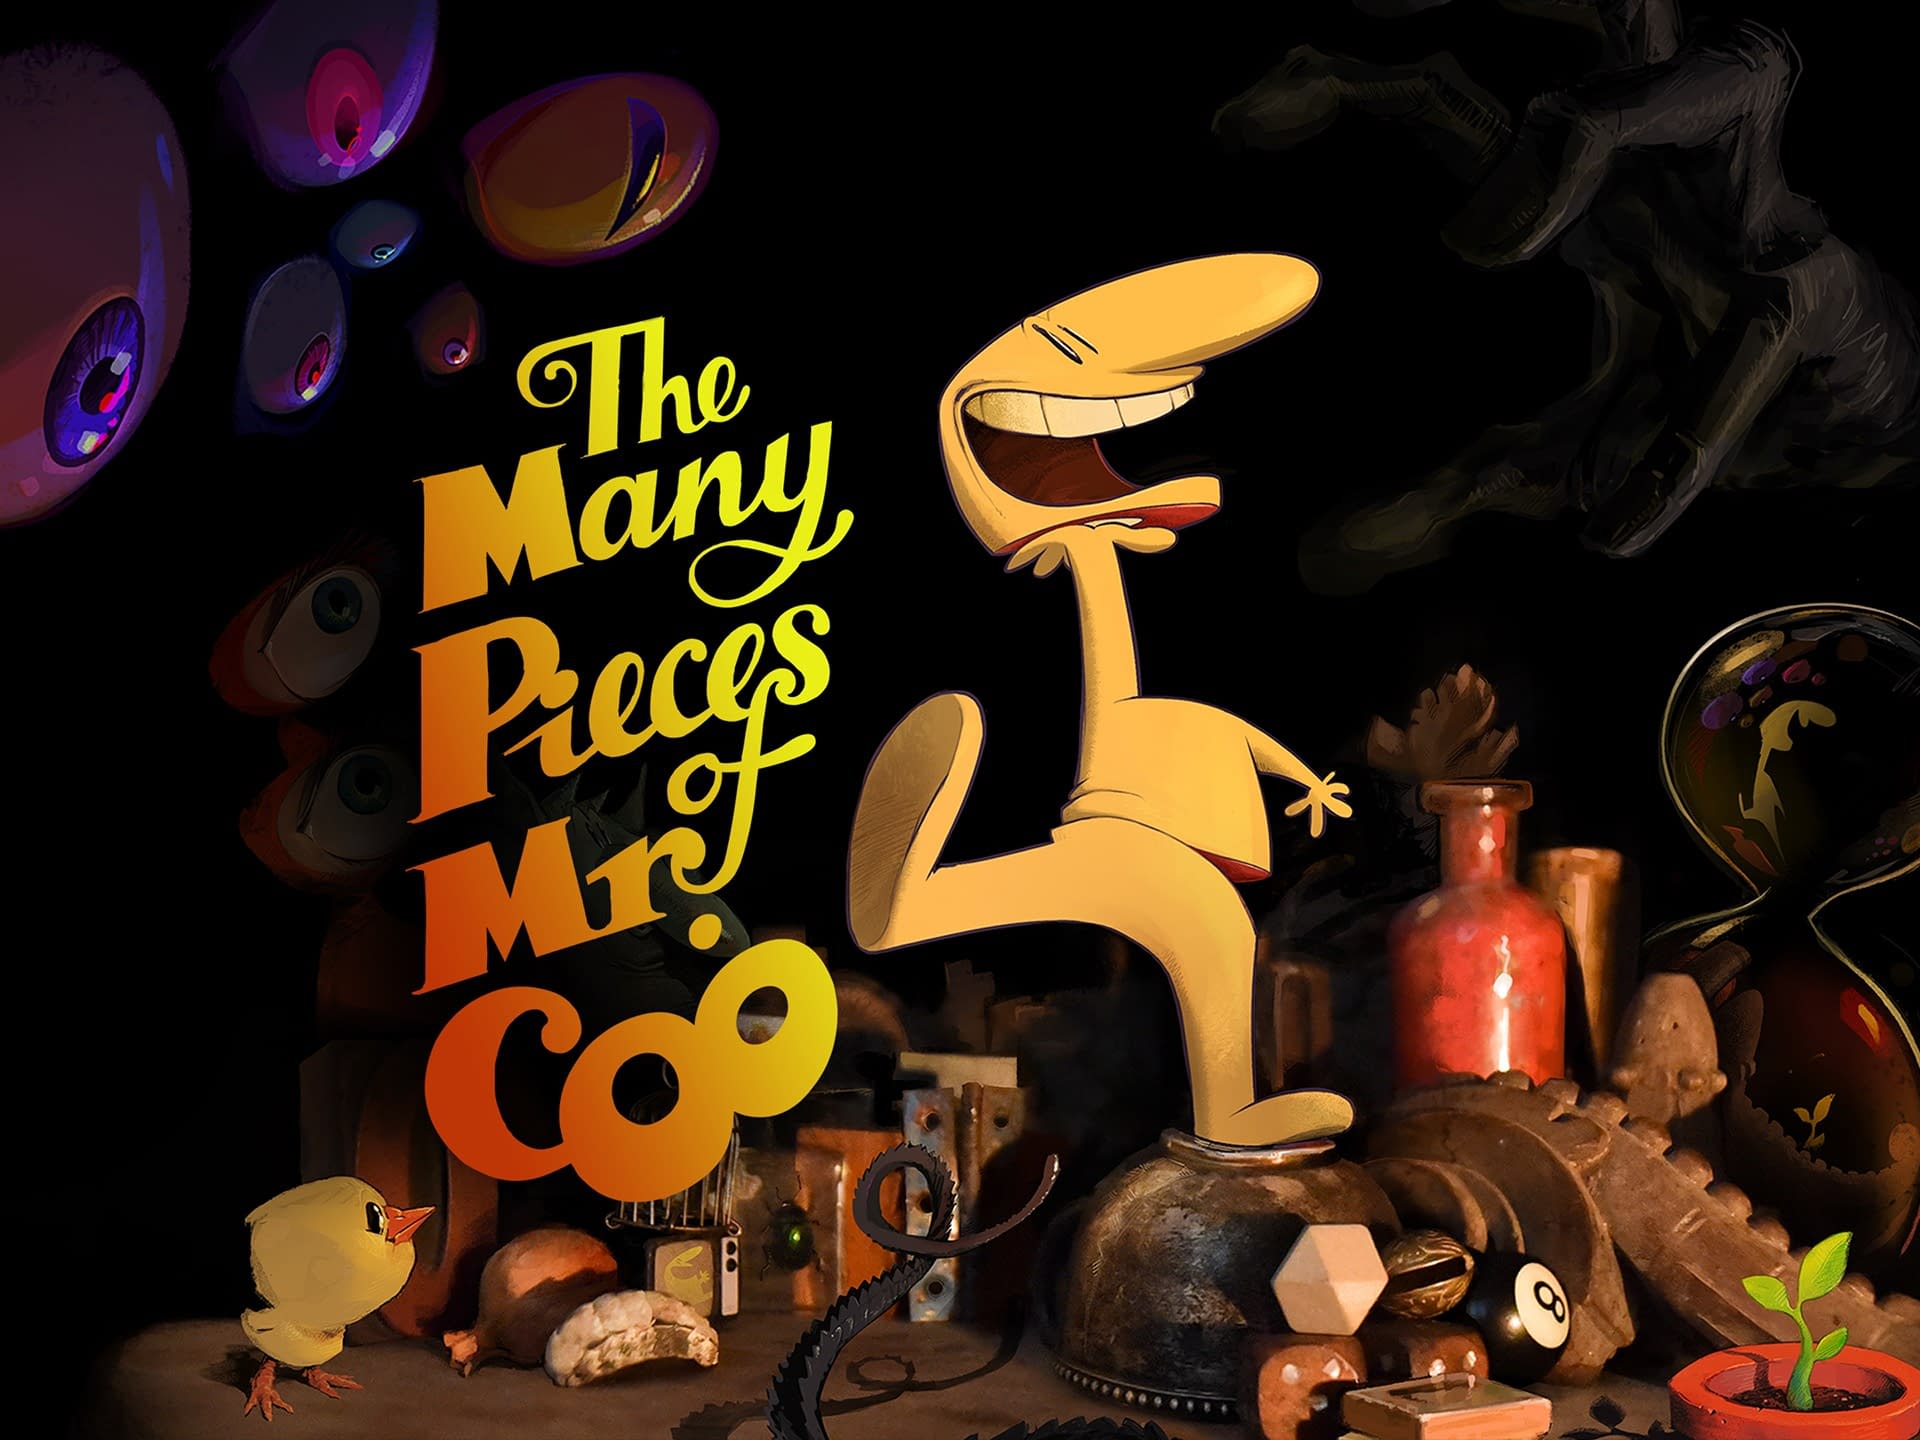 Cartoon Style Puzzle Game The Many Pieces of Mr. Coo Coming Soon